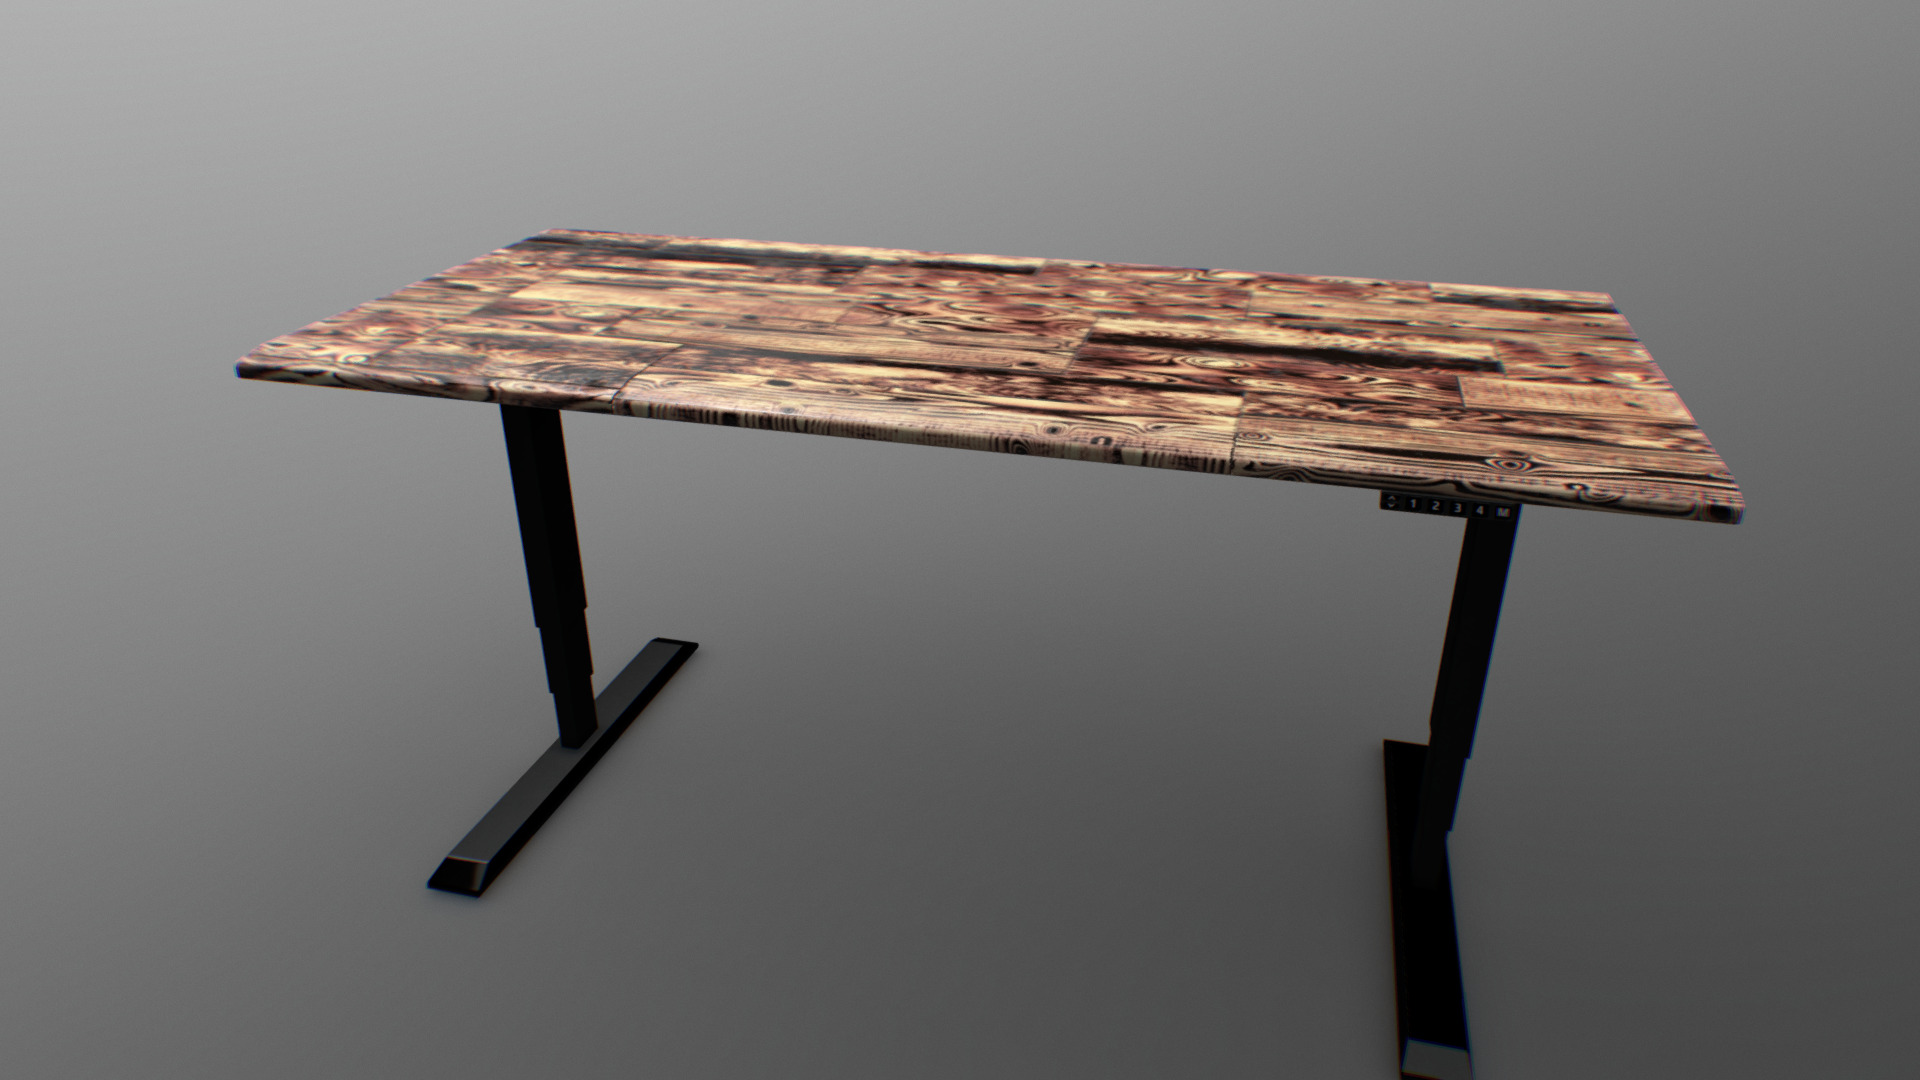 3D model Standing Desk - This is a 3D model of the Standing Desk. The 3D model is about a table with a sign on it.